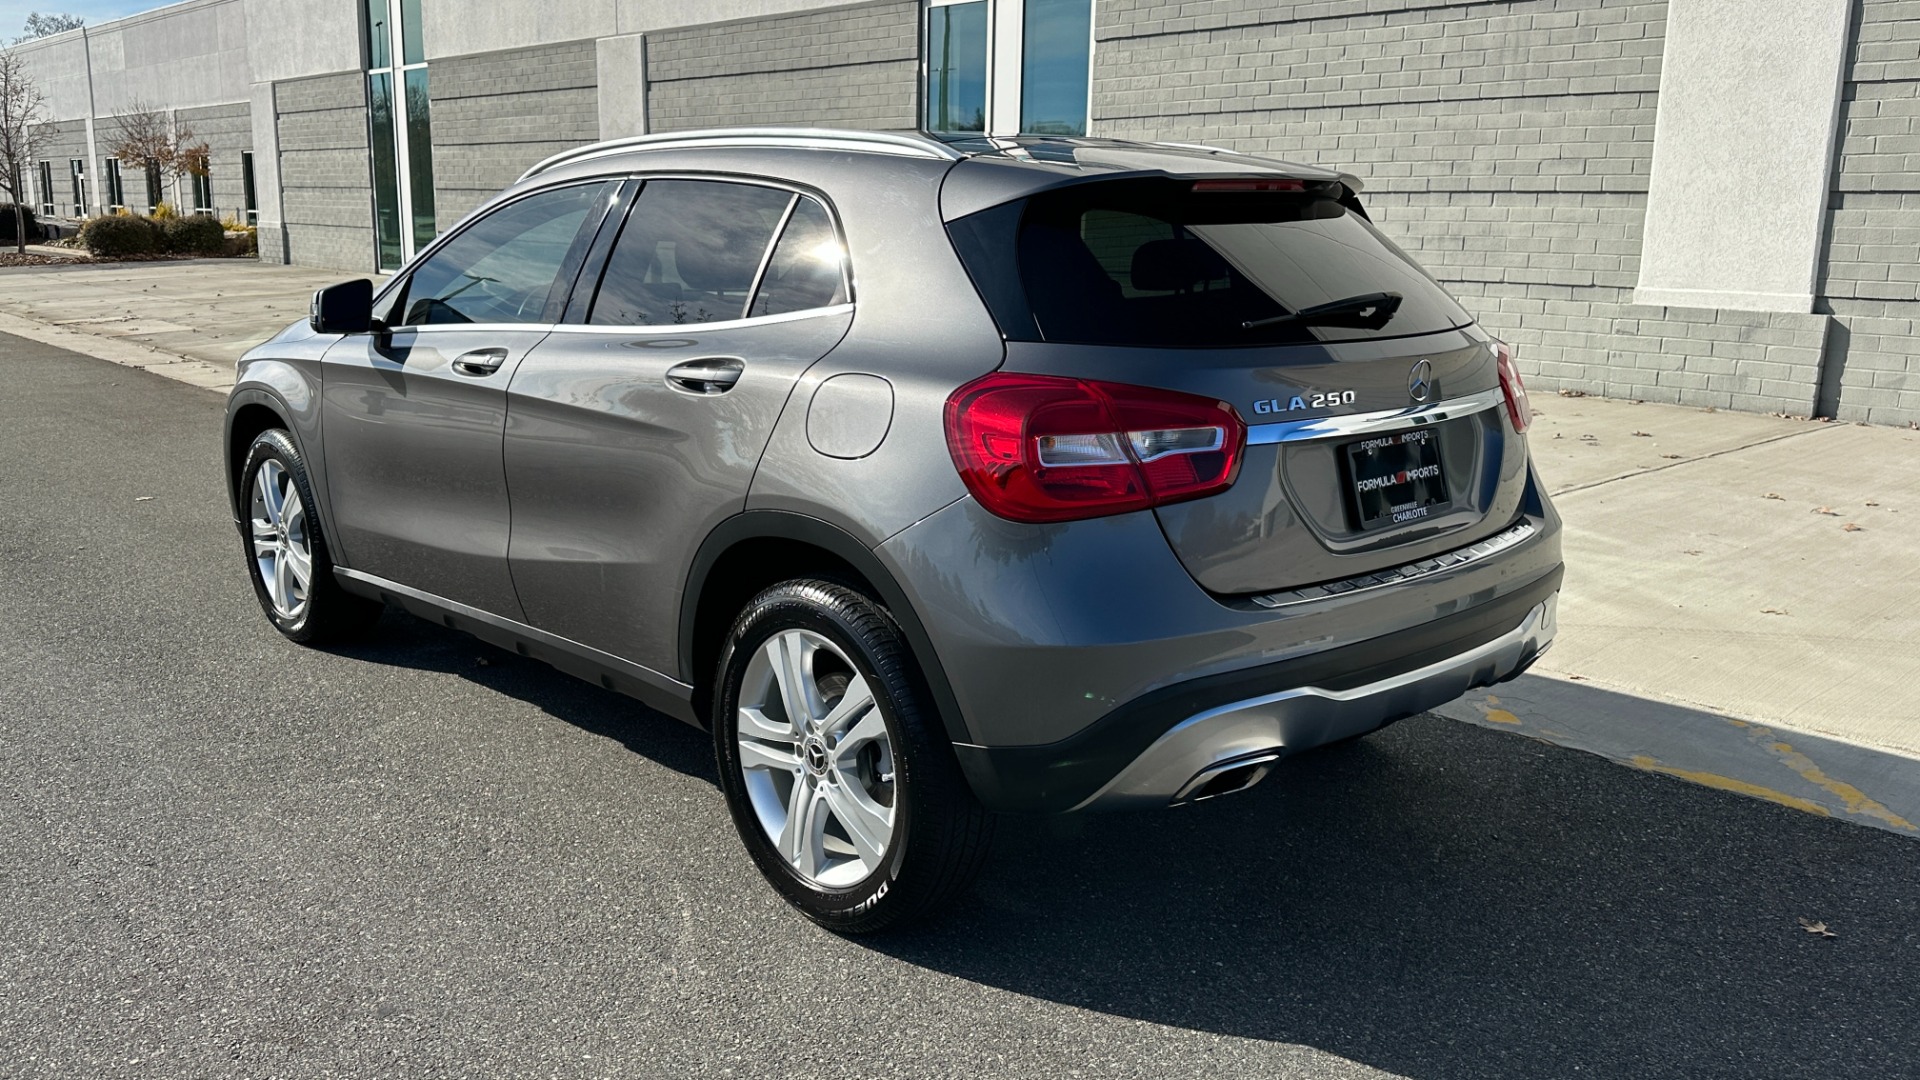 Used 2018 Mercedes-Benz GLA GLA 250 / PANORAMIC SUNROOF / BLIND SPOT ASSIST / HEATED FRONT SEATS for sale $27,999 at Formula Imports in Charlotte NC 28227 4